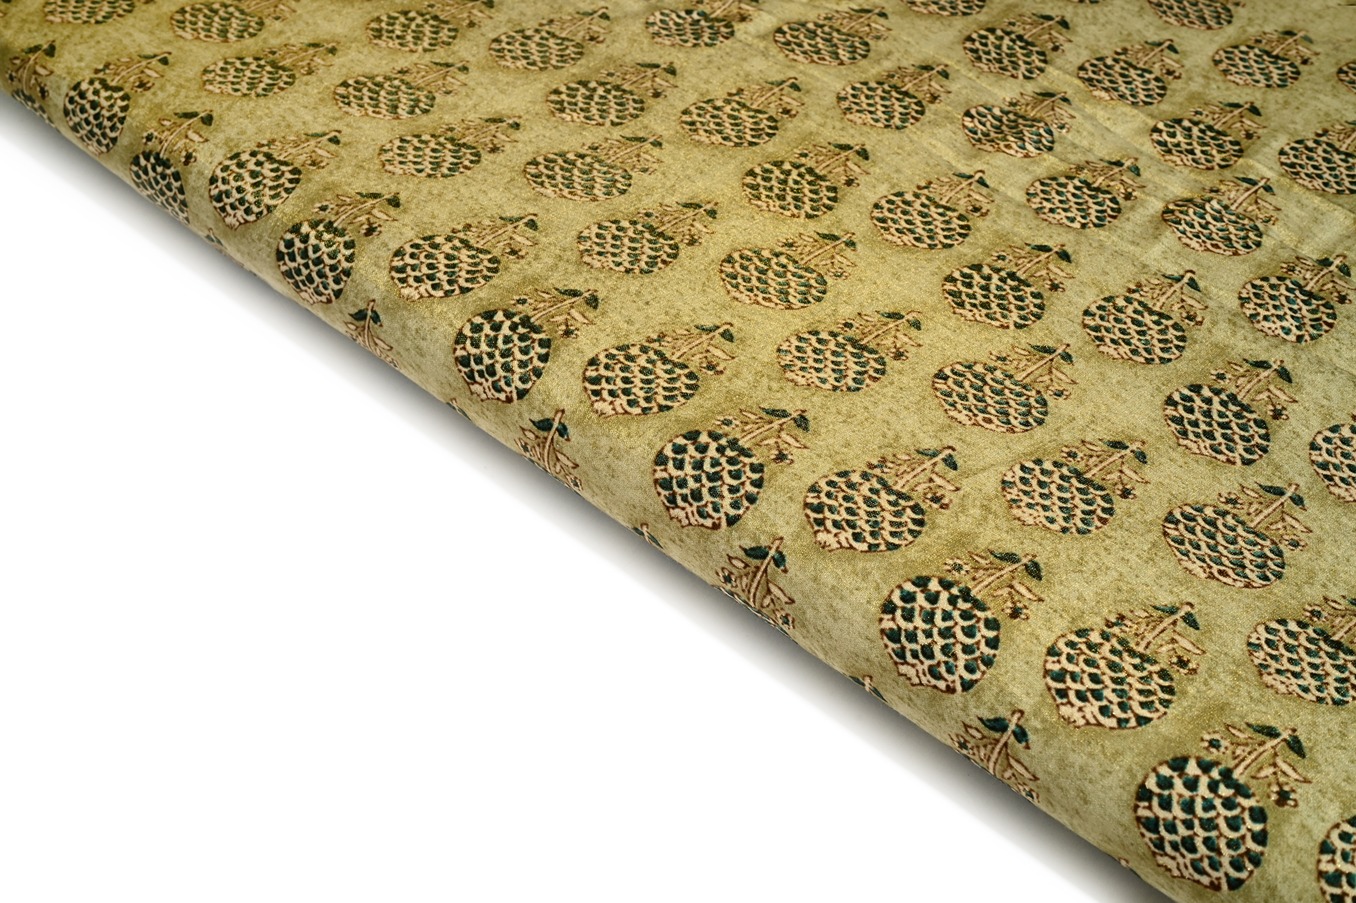 METHI GREEN COLOR WISCOSS MUSLIN DIGITAL GOLD FOIL WITH FLORAL MOTIVE PATTERN PRINTED FABRIC 9060